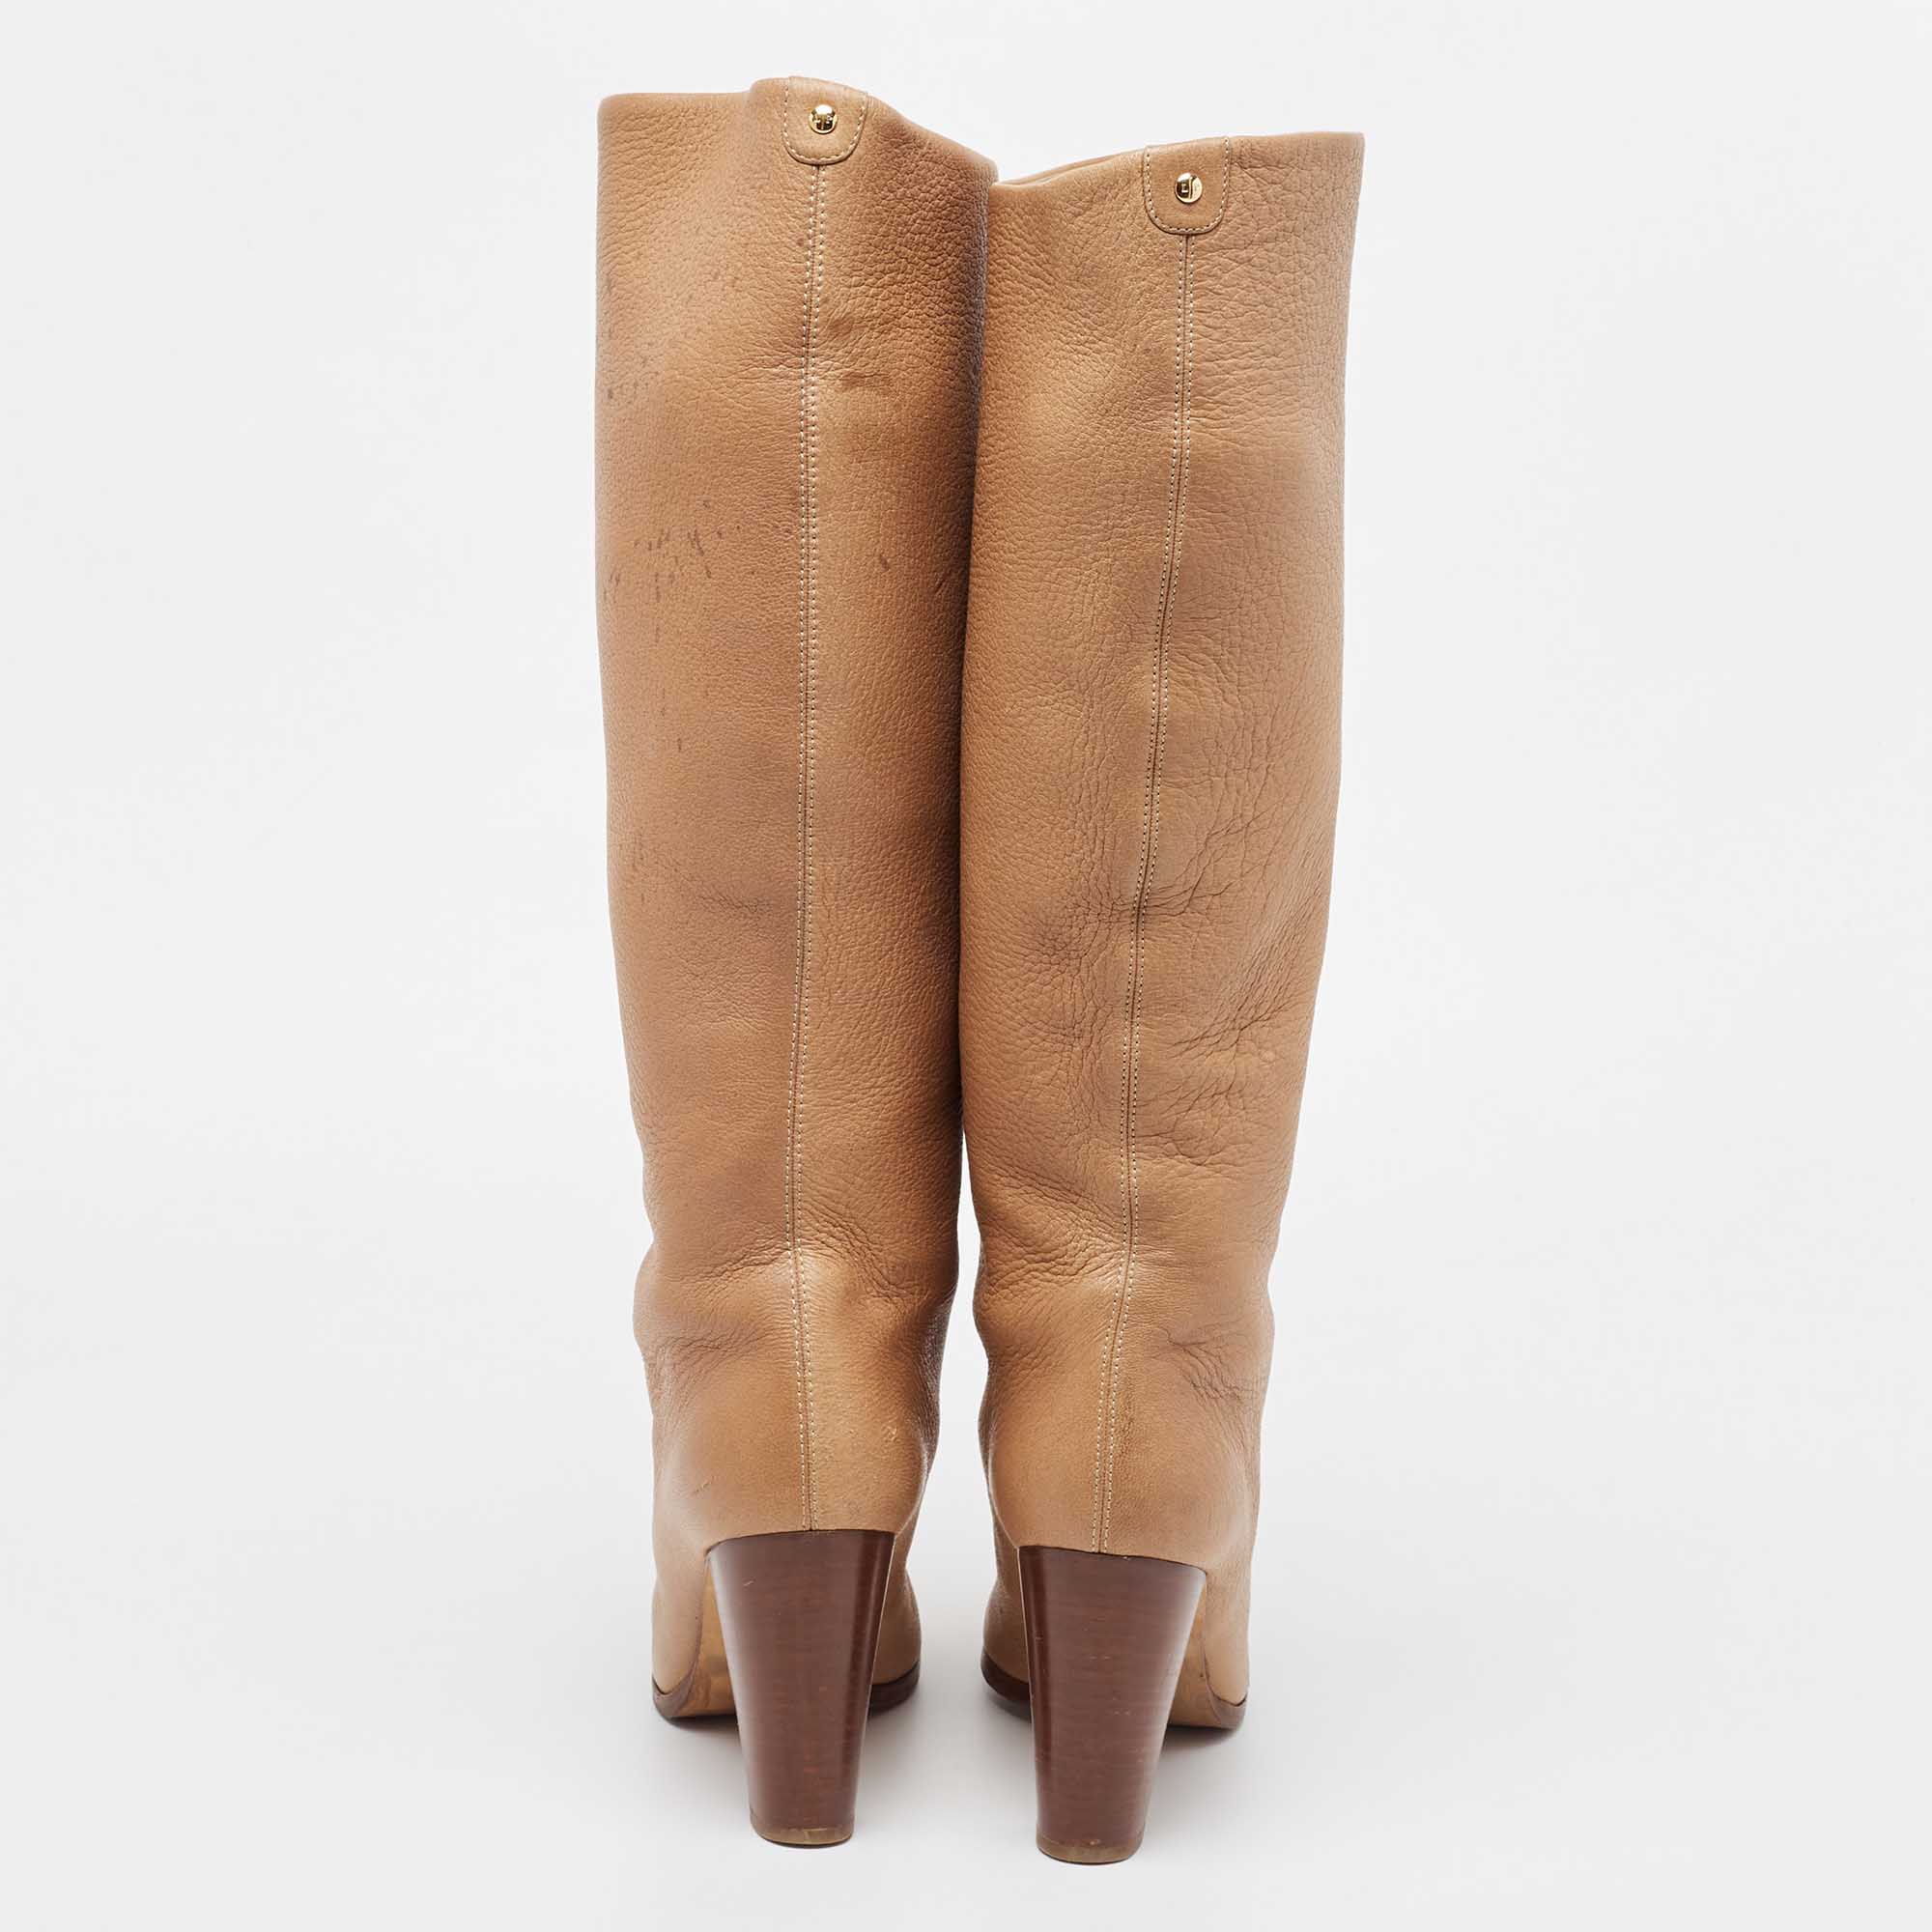 Loro Piana Beige Leather Knee Length Boots Size 39